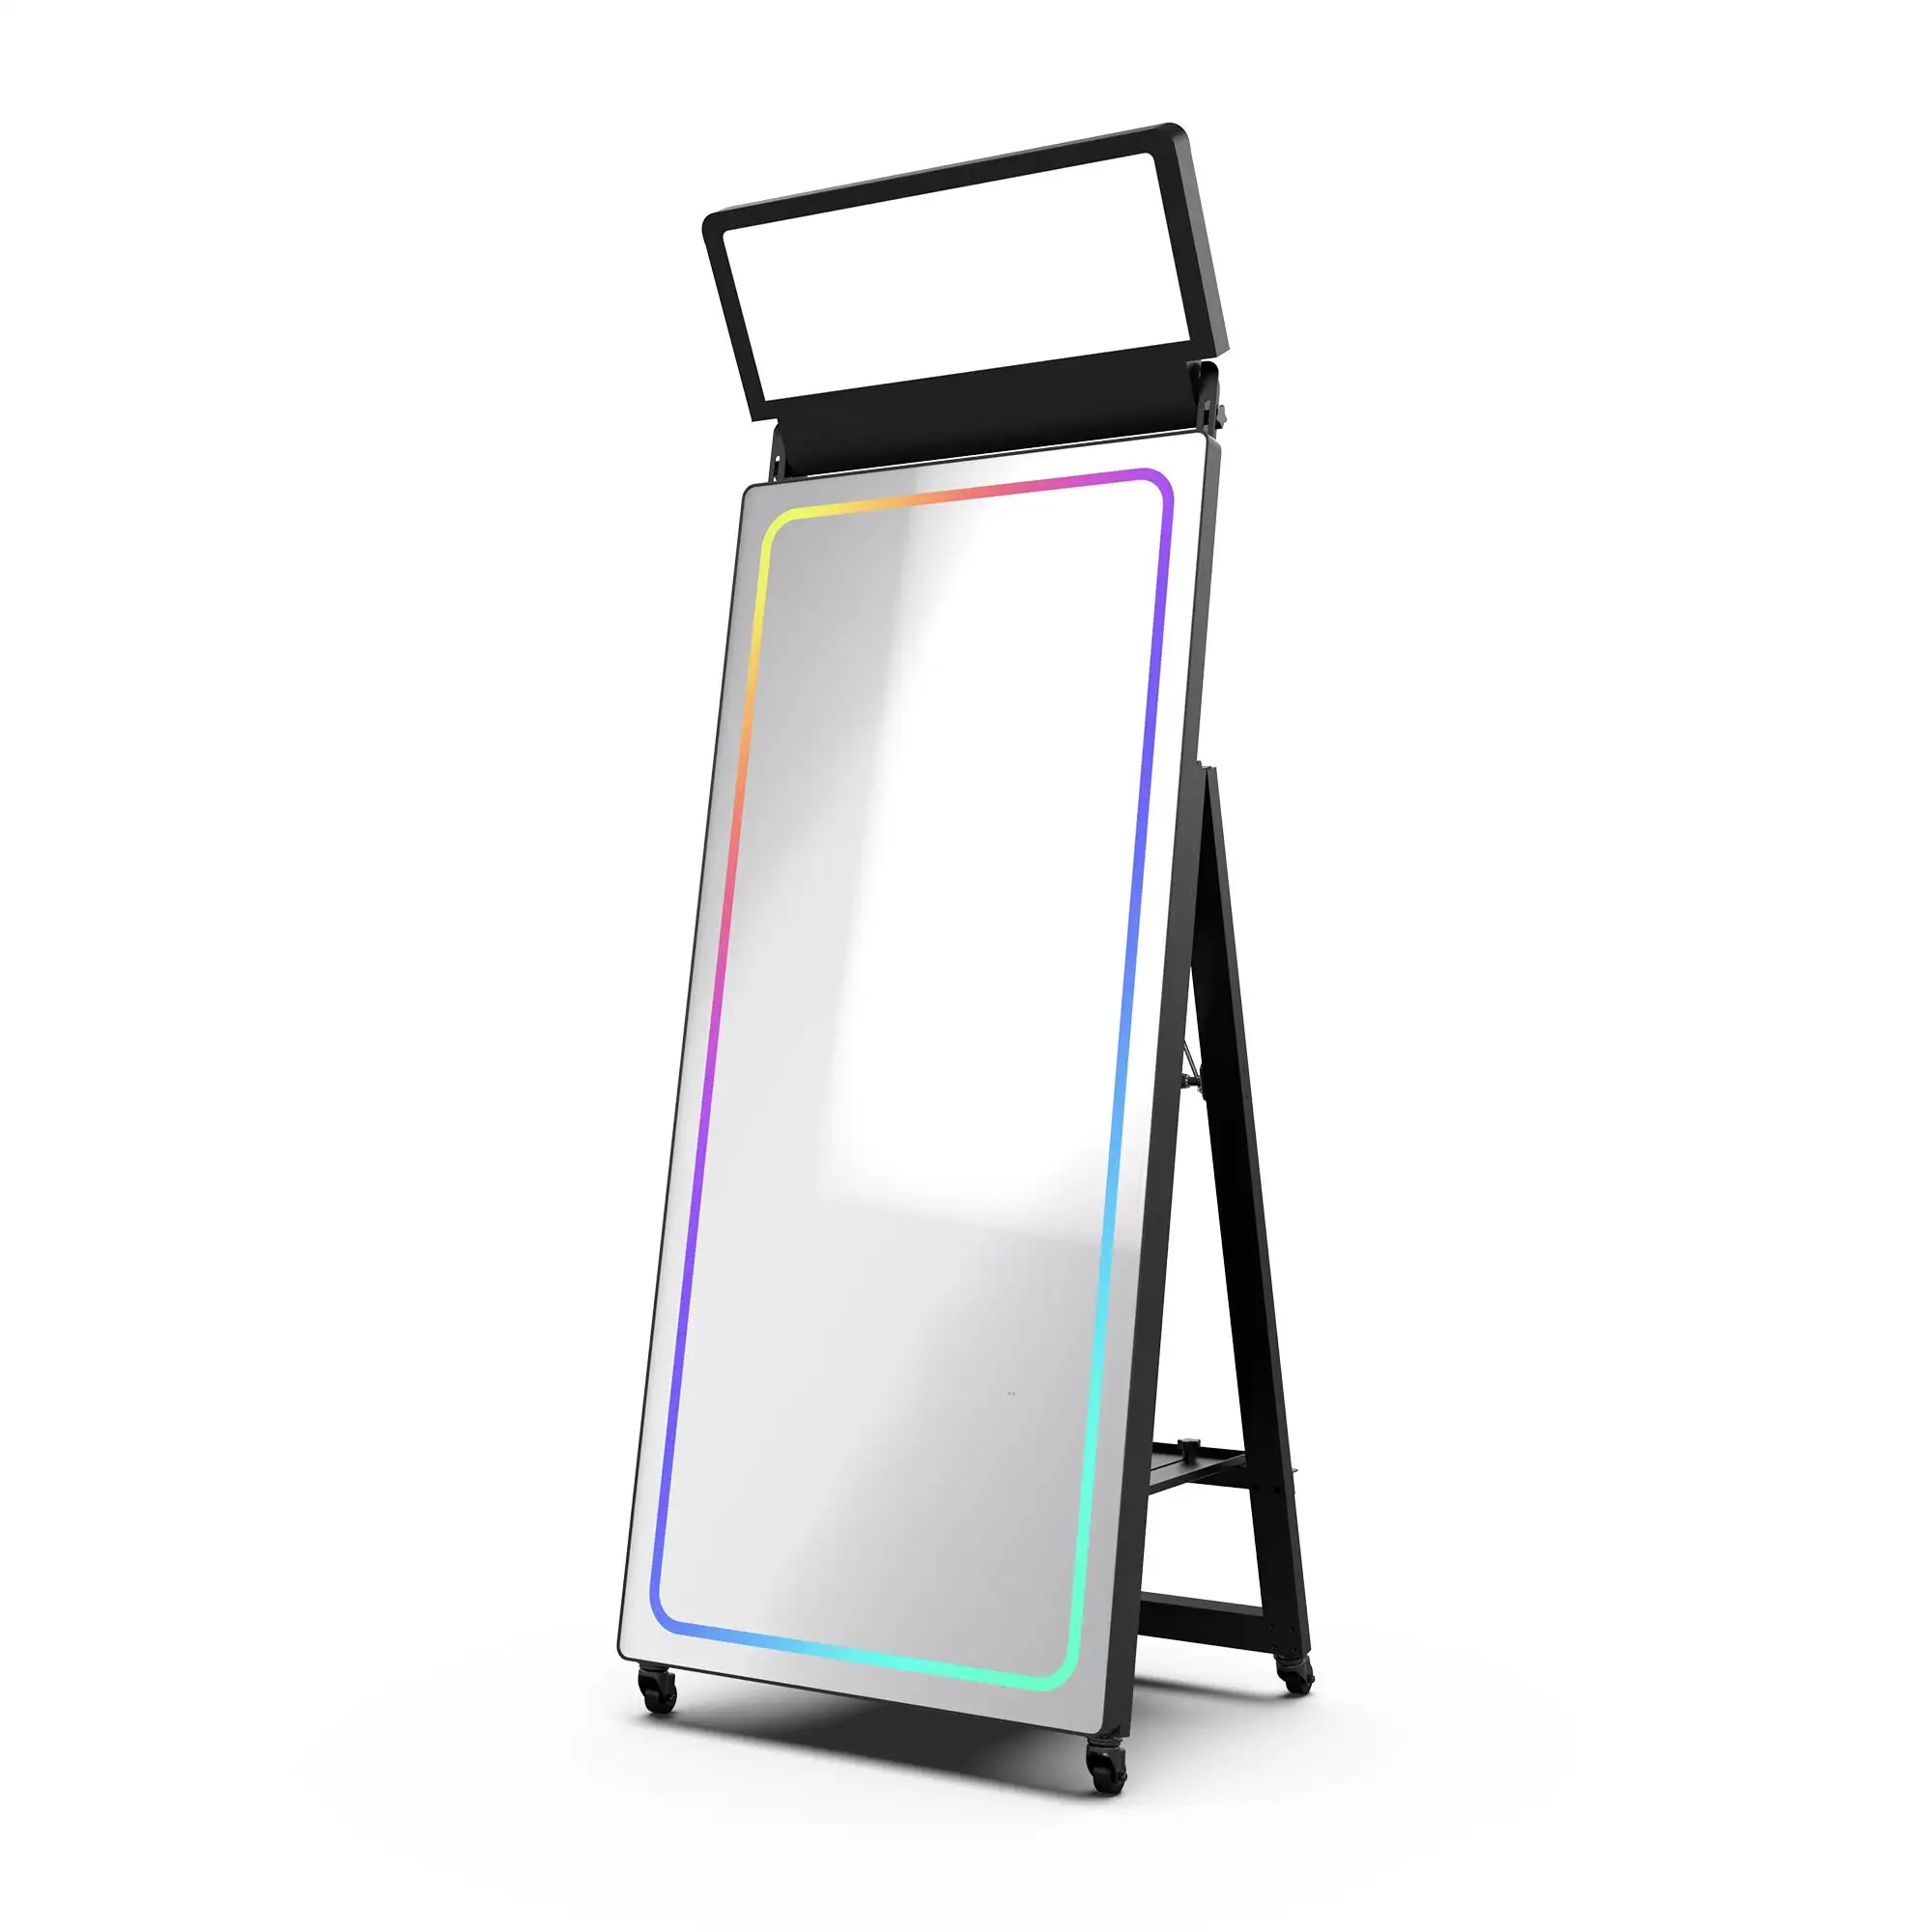 70 inches Magic Selfie Mirror Automatic camera Photo Booth For Shopping Mall Printer Stand Photo booth